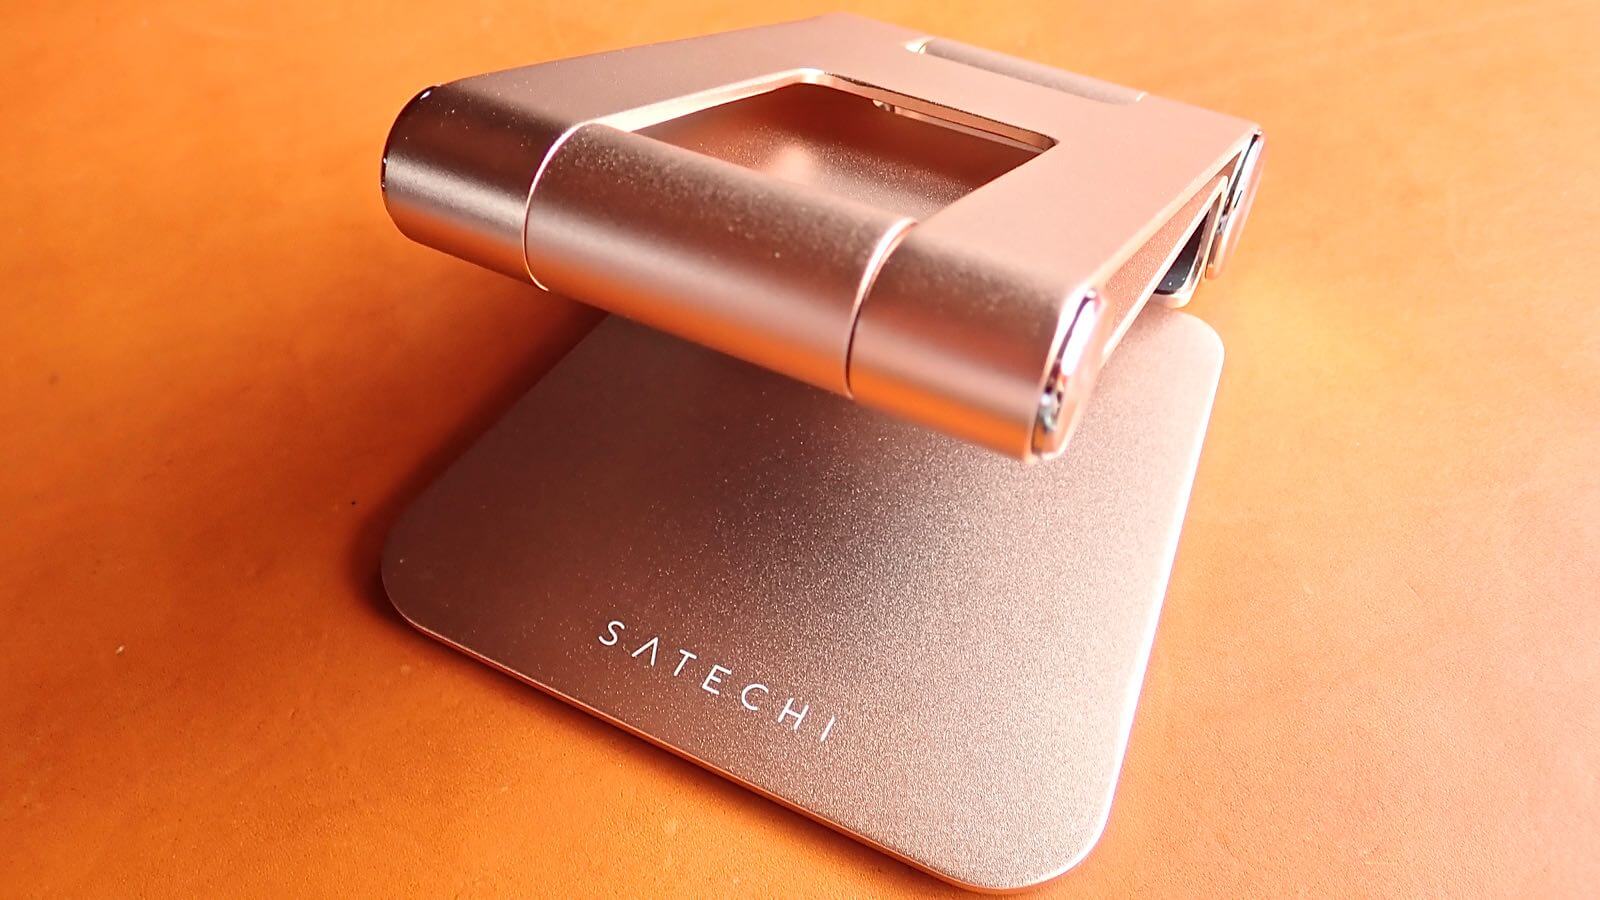 0198 Satechi R1 aluminum multi angle folding tablet stand review 09